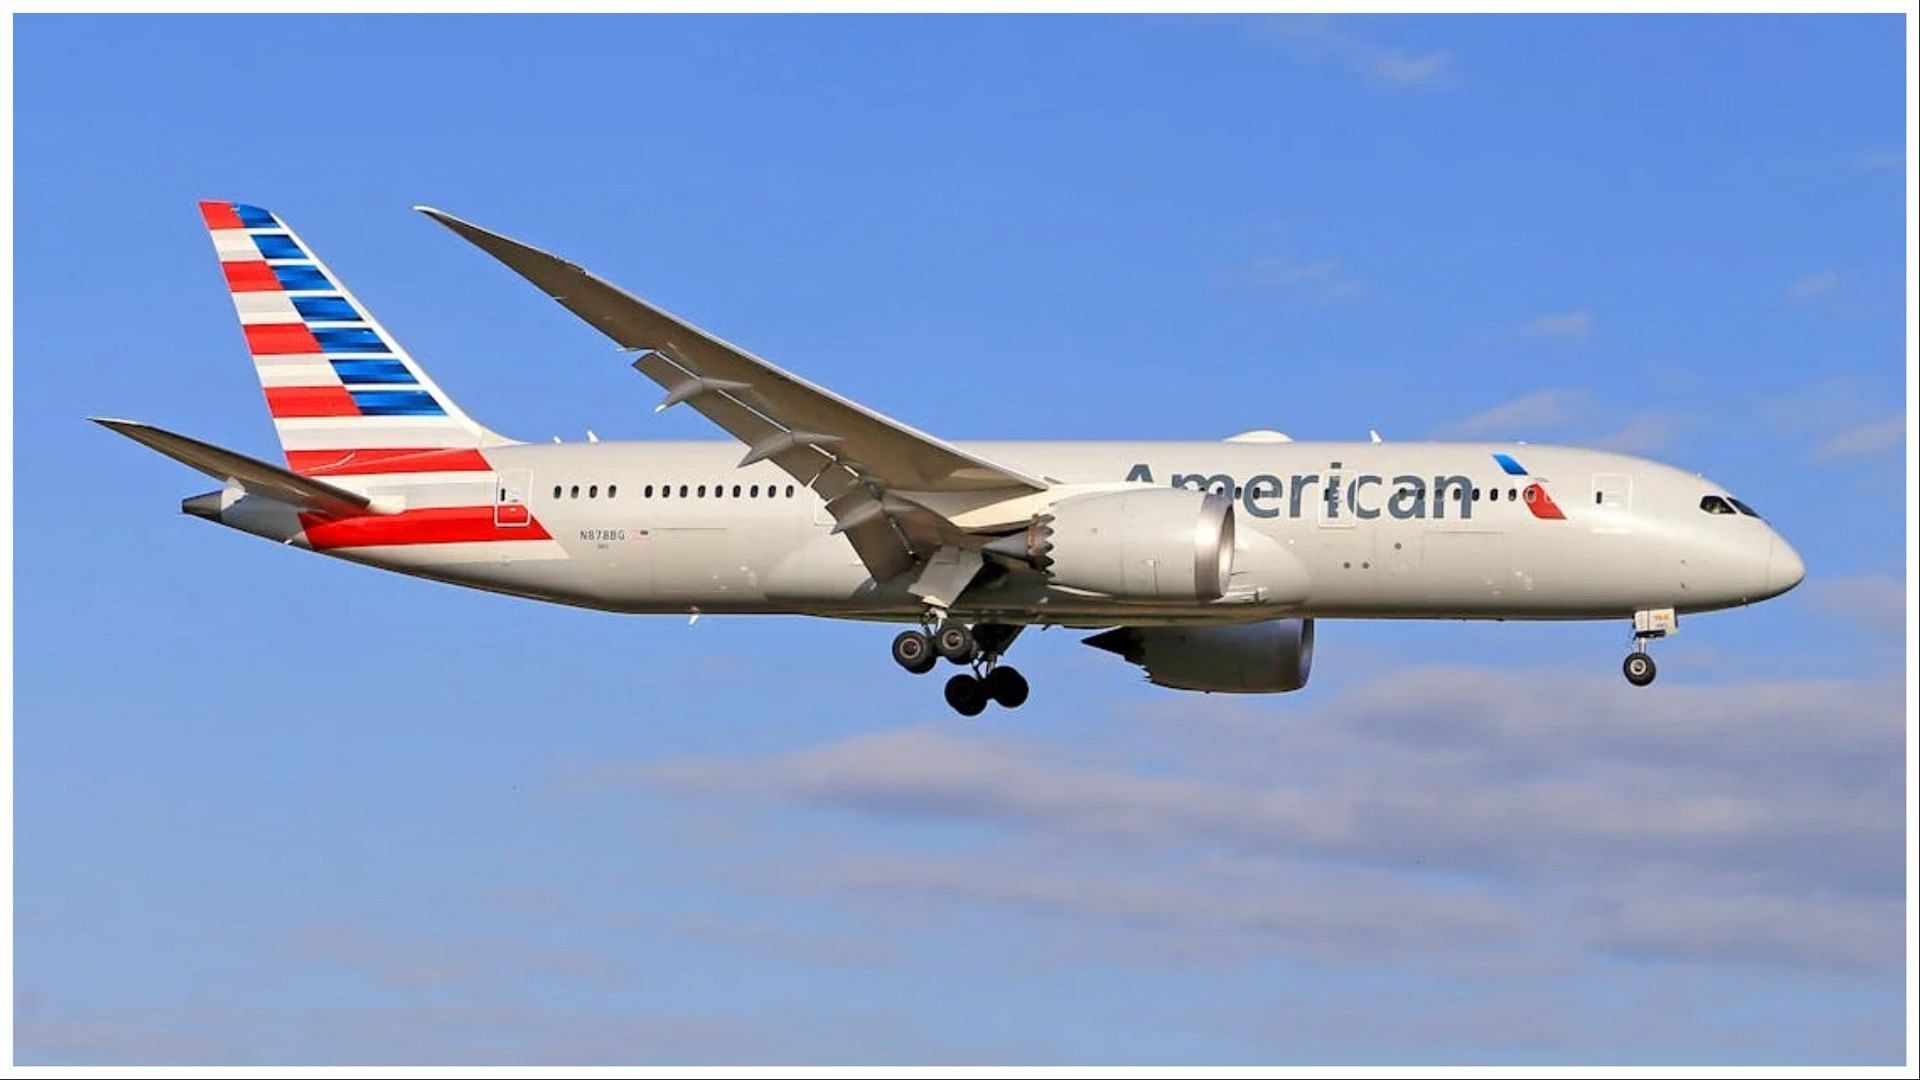 American Airlines passenger was immediately removed from the plane after the incident (Image via Pexels)